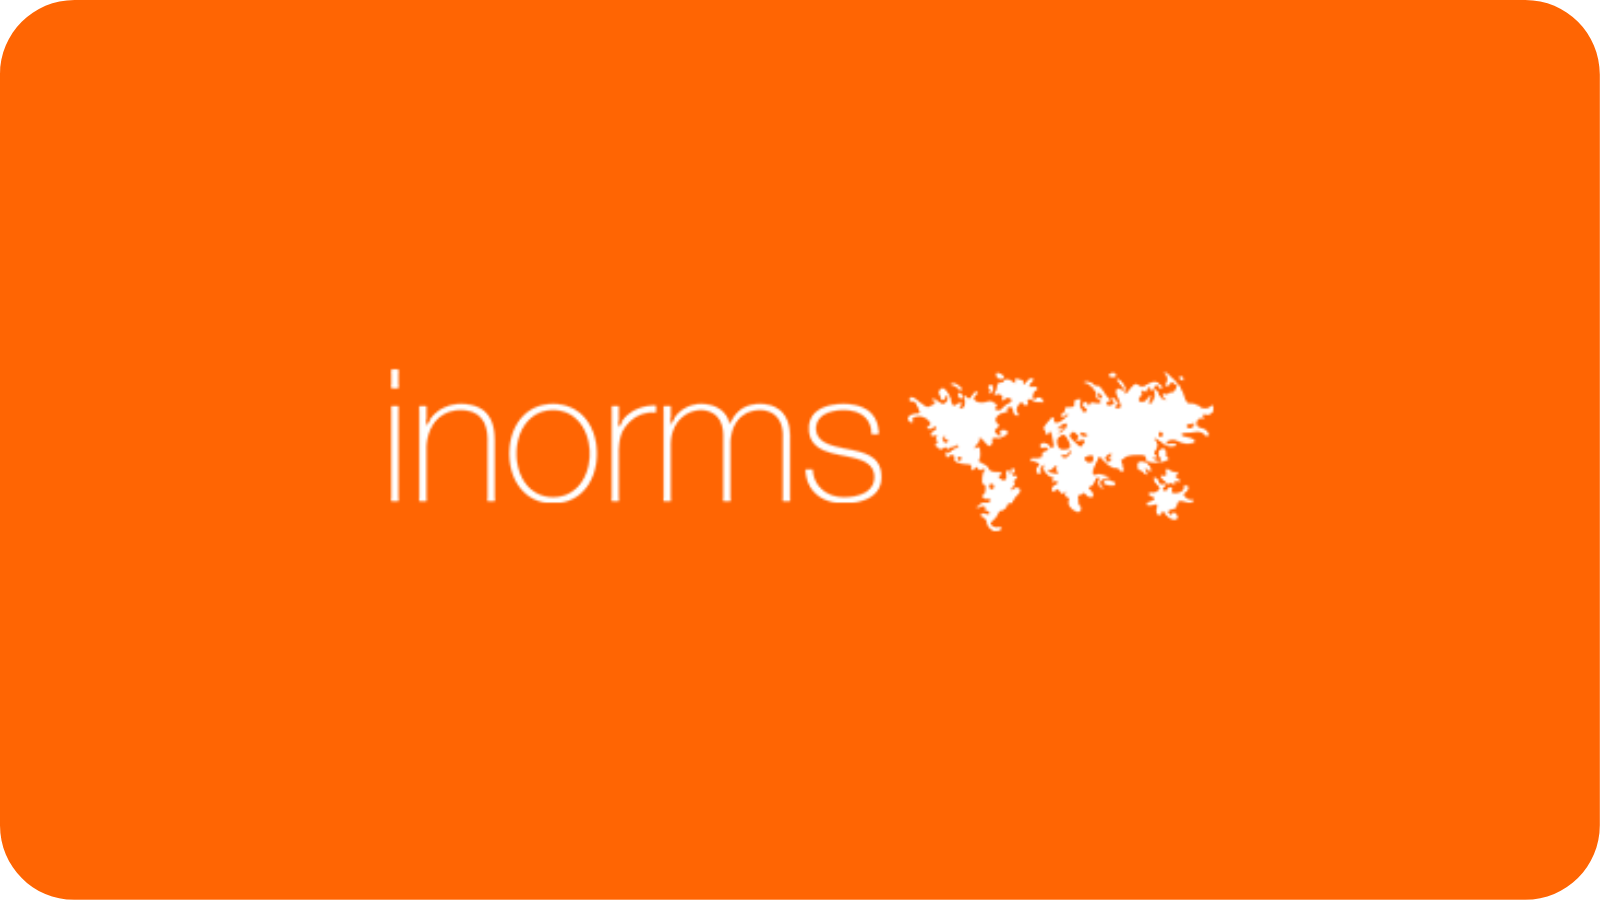 INORMS frame